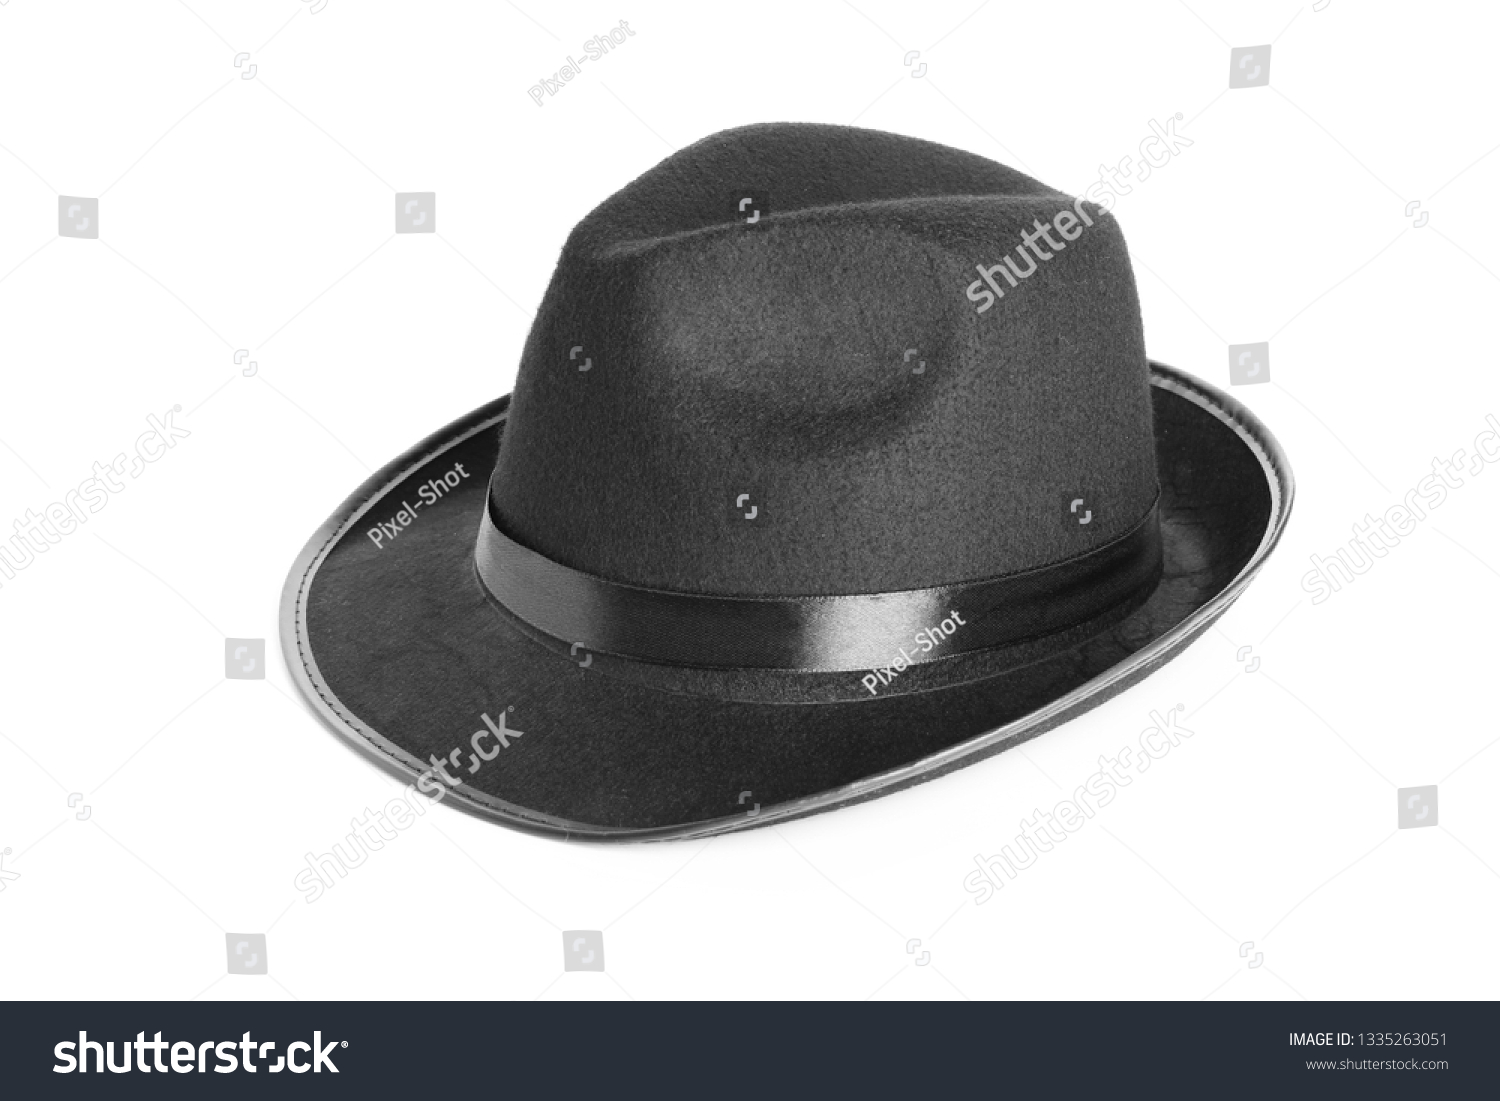 Male hat on white background #1335263051